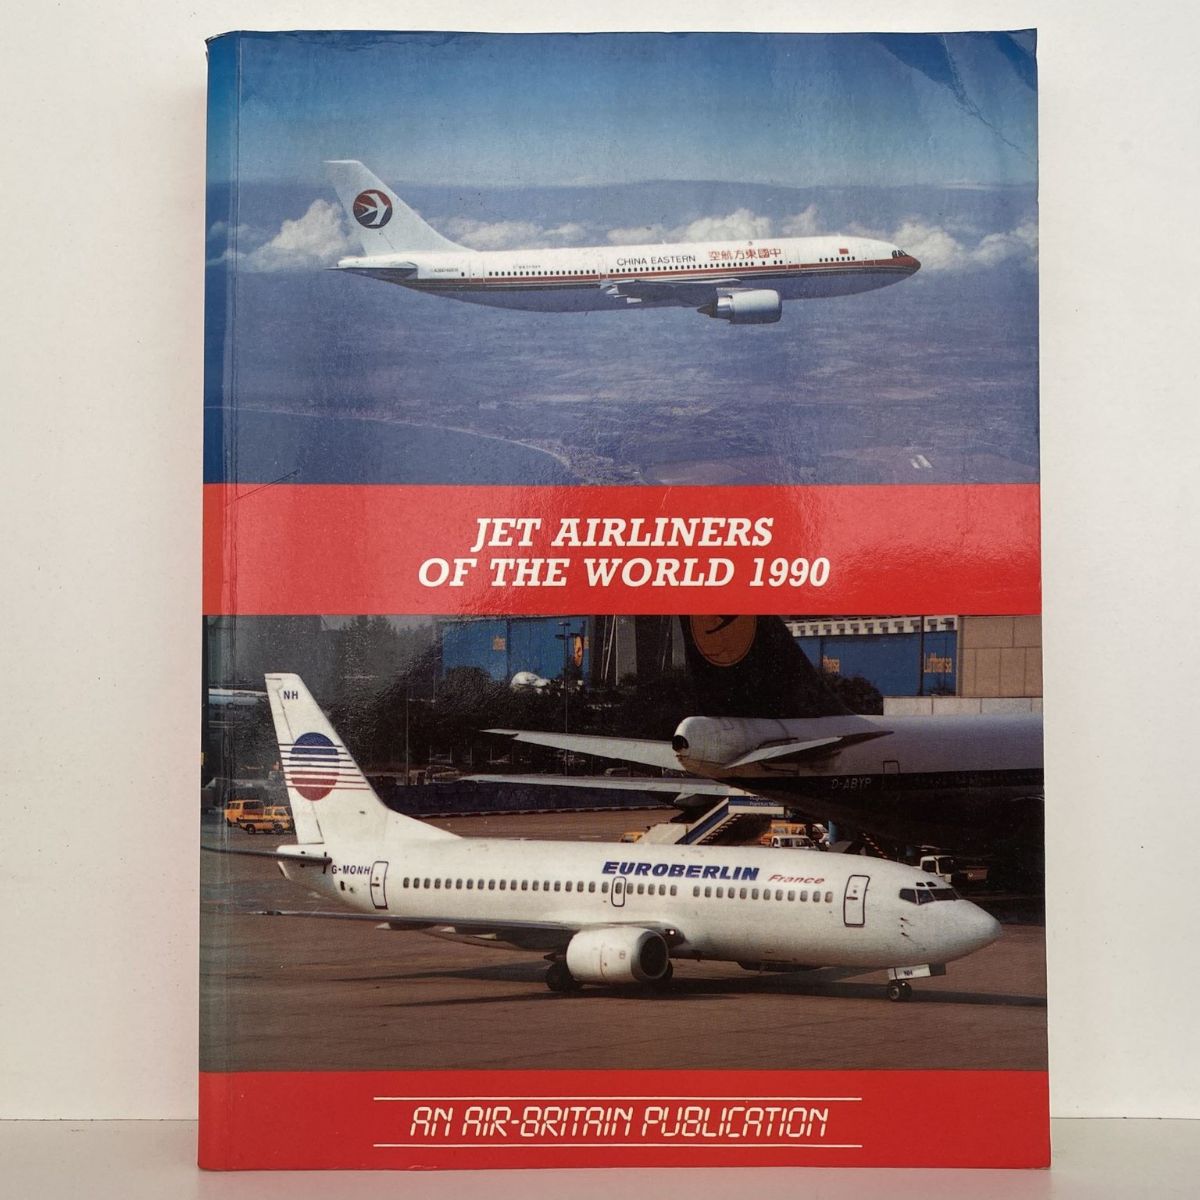 Jet Airliners of the World 1990